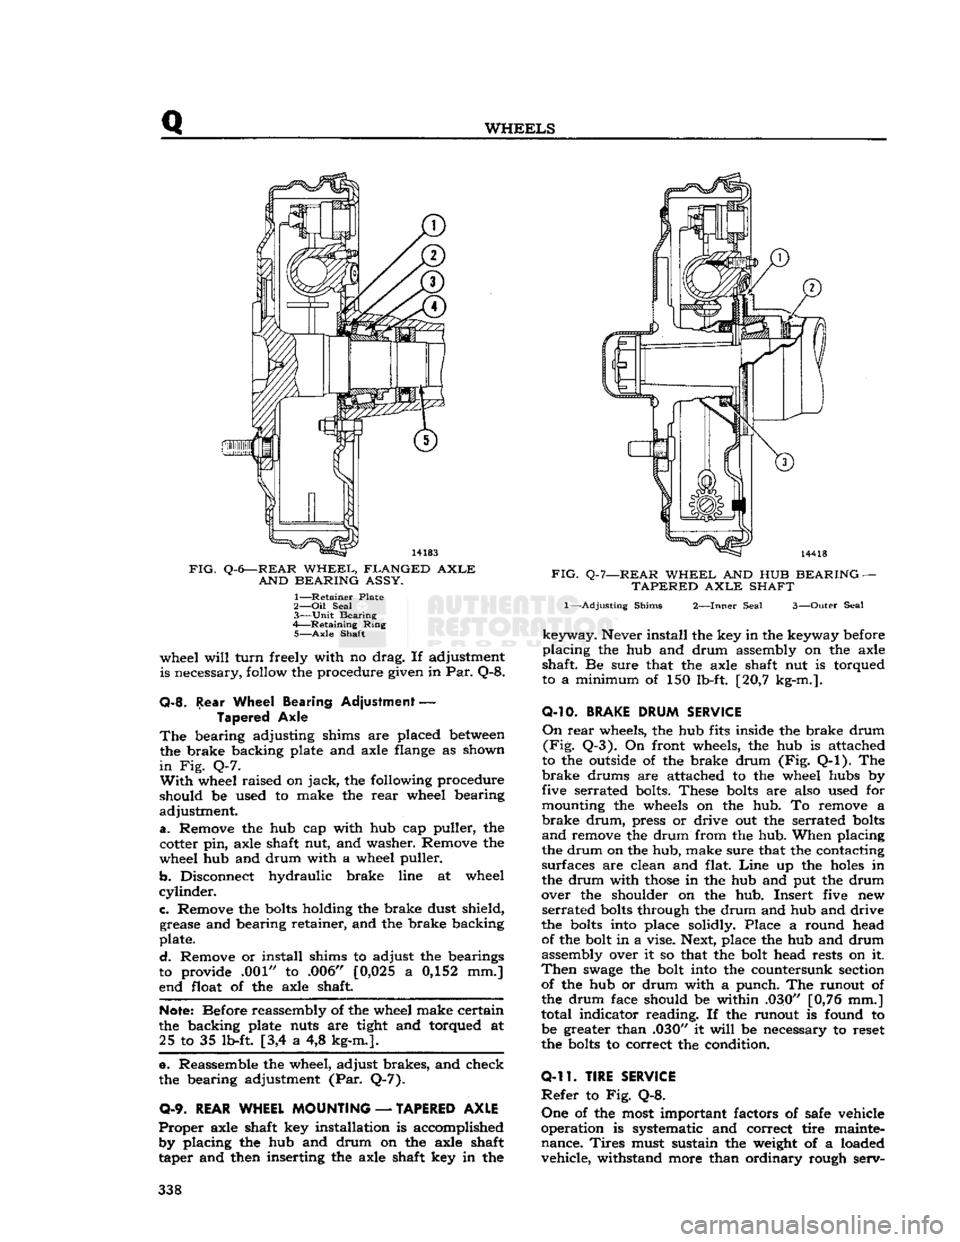 JEEP CJ 1953  Service Manual 
Q 

WHEELS 

FIG.
 Q-6—REAR
 WHEEL,
 FLANGED
 AXLE 
 AND
 BEARING
 ASSY. 

1—
 Retainer
 Plate 

2— Oil
 Seal 

3—
 Unit
 Bearing 

4—
 Retaining
 Ring 
 5—
 Axle
 Shaft 
 wheel
 will
 tu